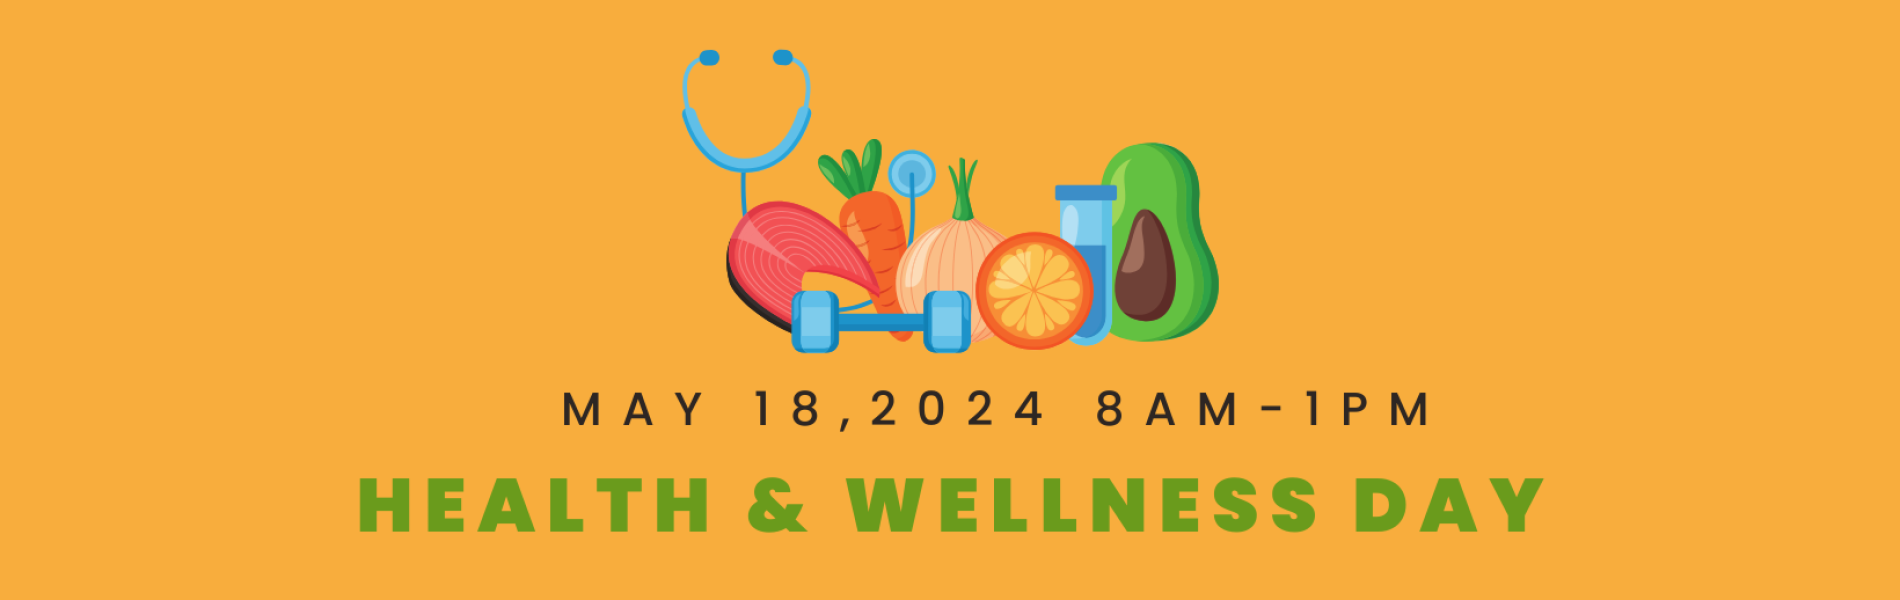 Health and Wellness Day at the Hendersonville Farmers Market 